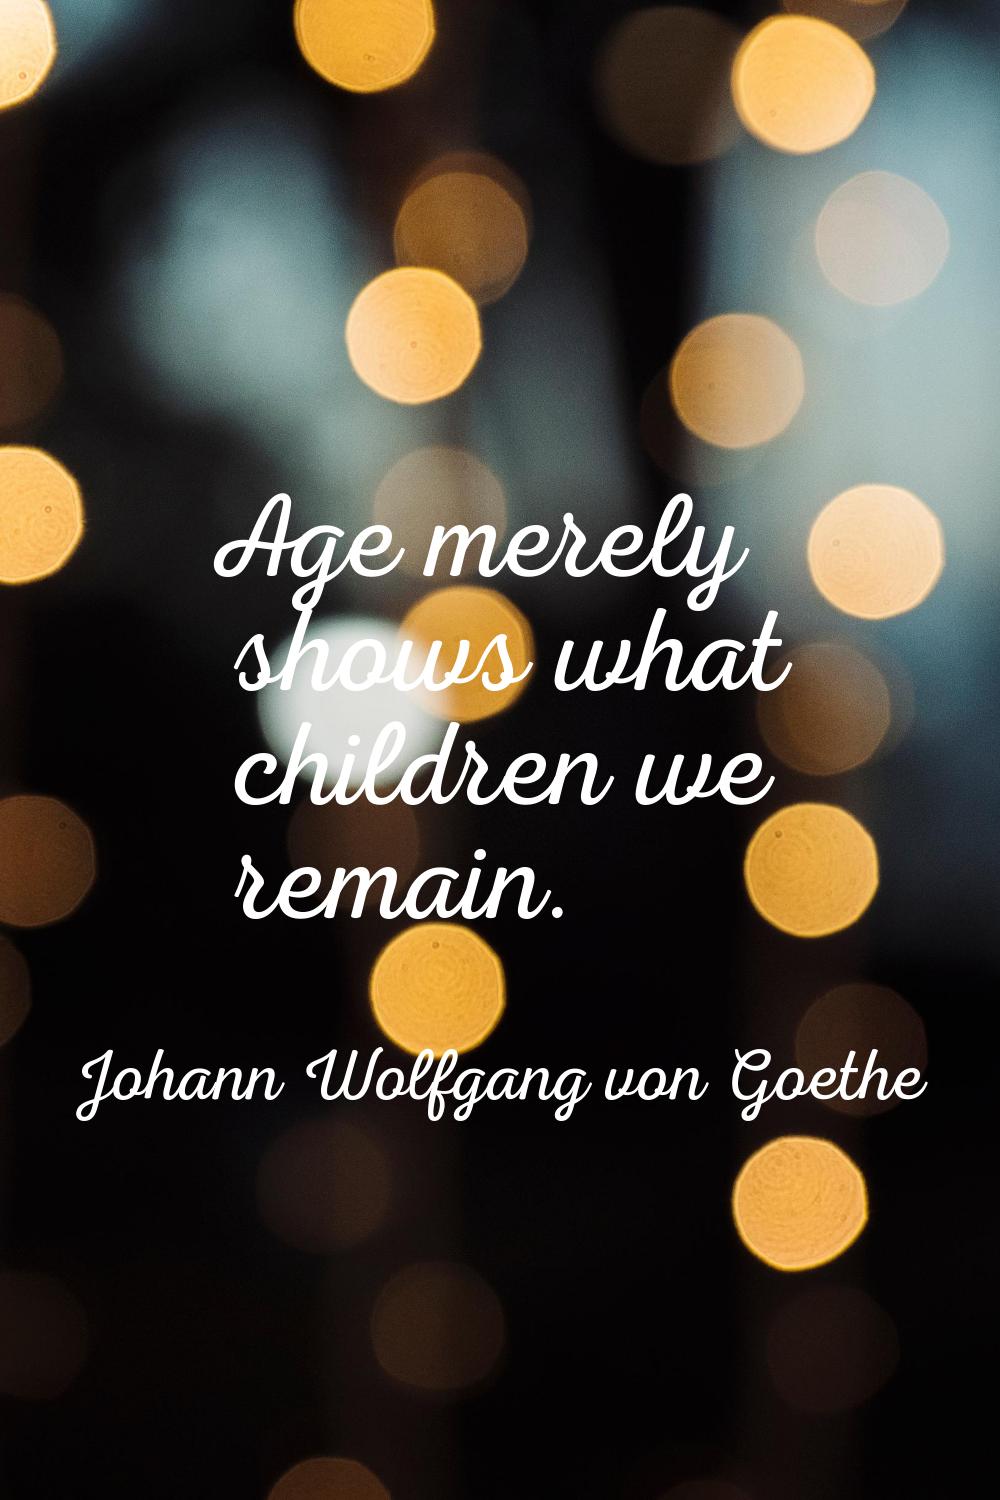 Age merely shows what children we remain.